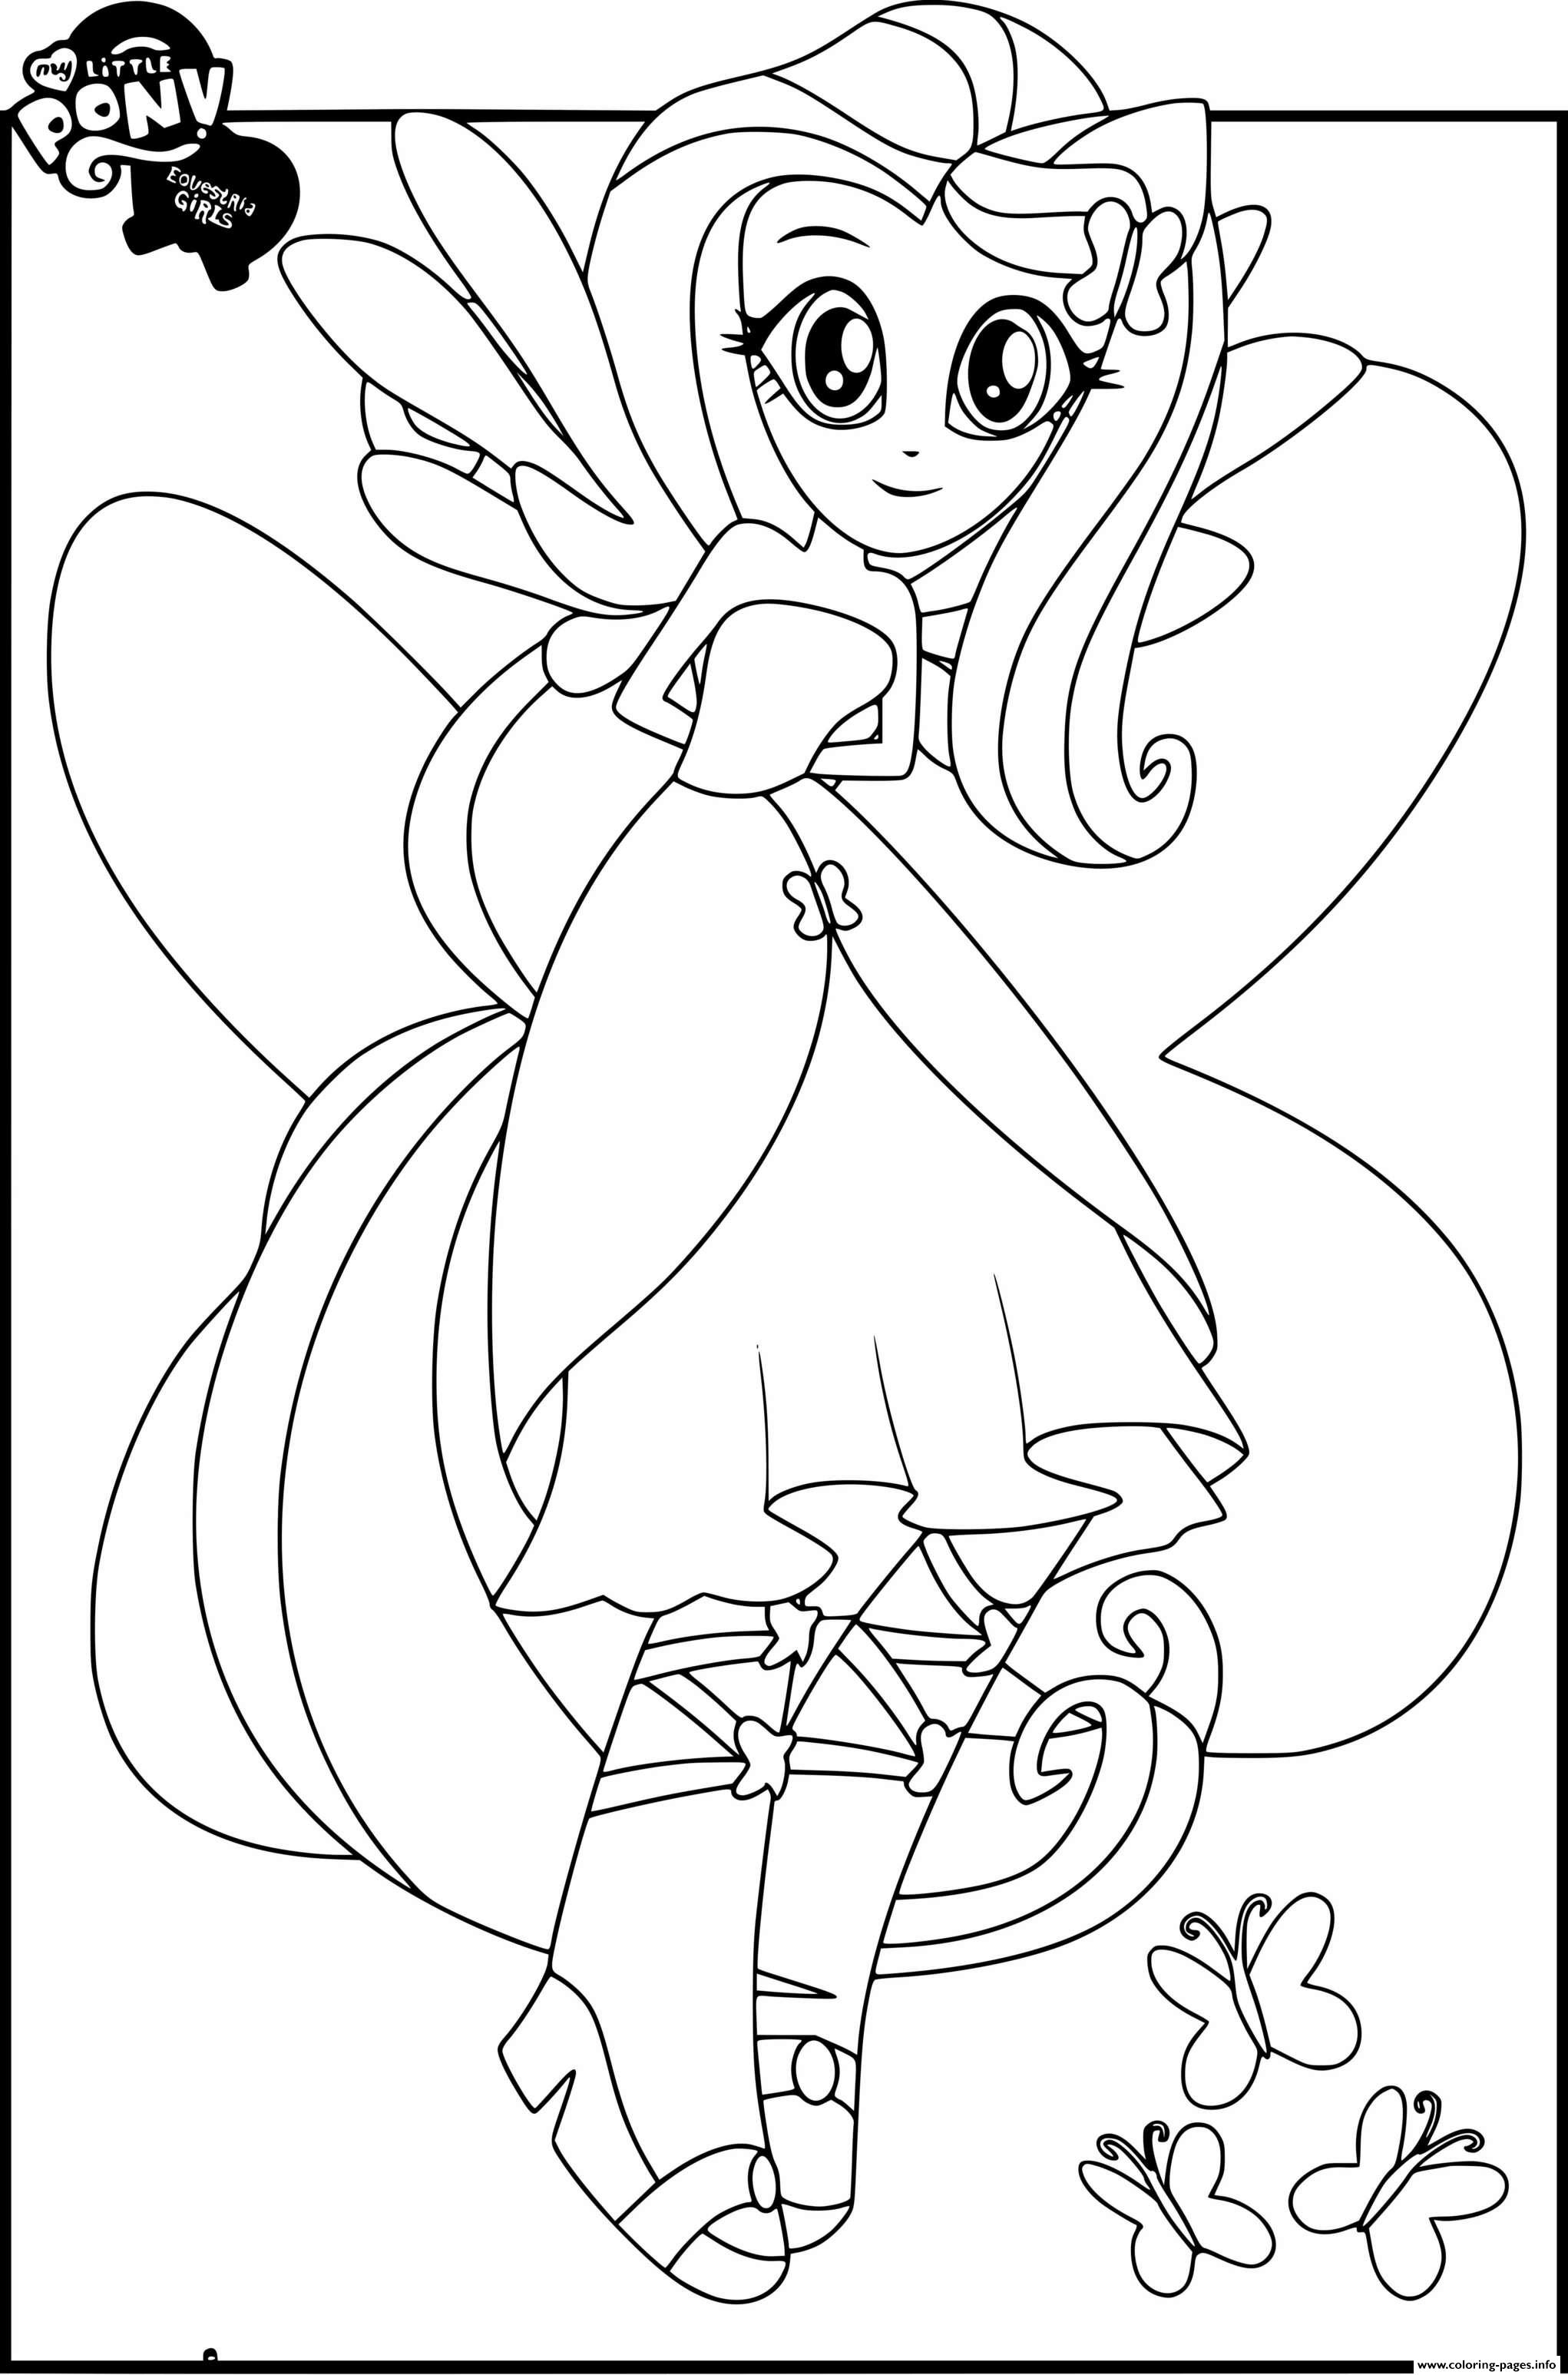 My Little Pony Equestria Girls Fluttershy Coloring page Printable